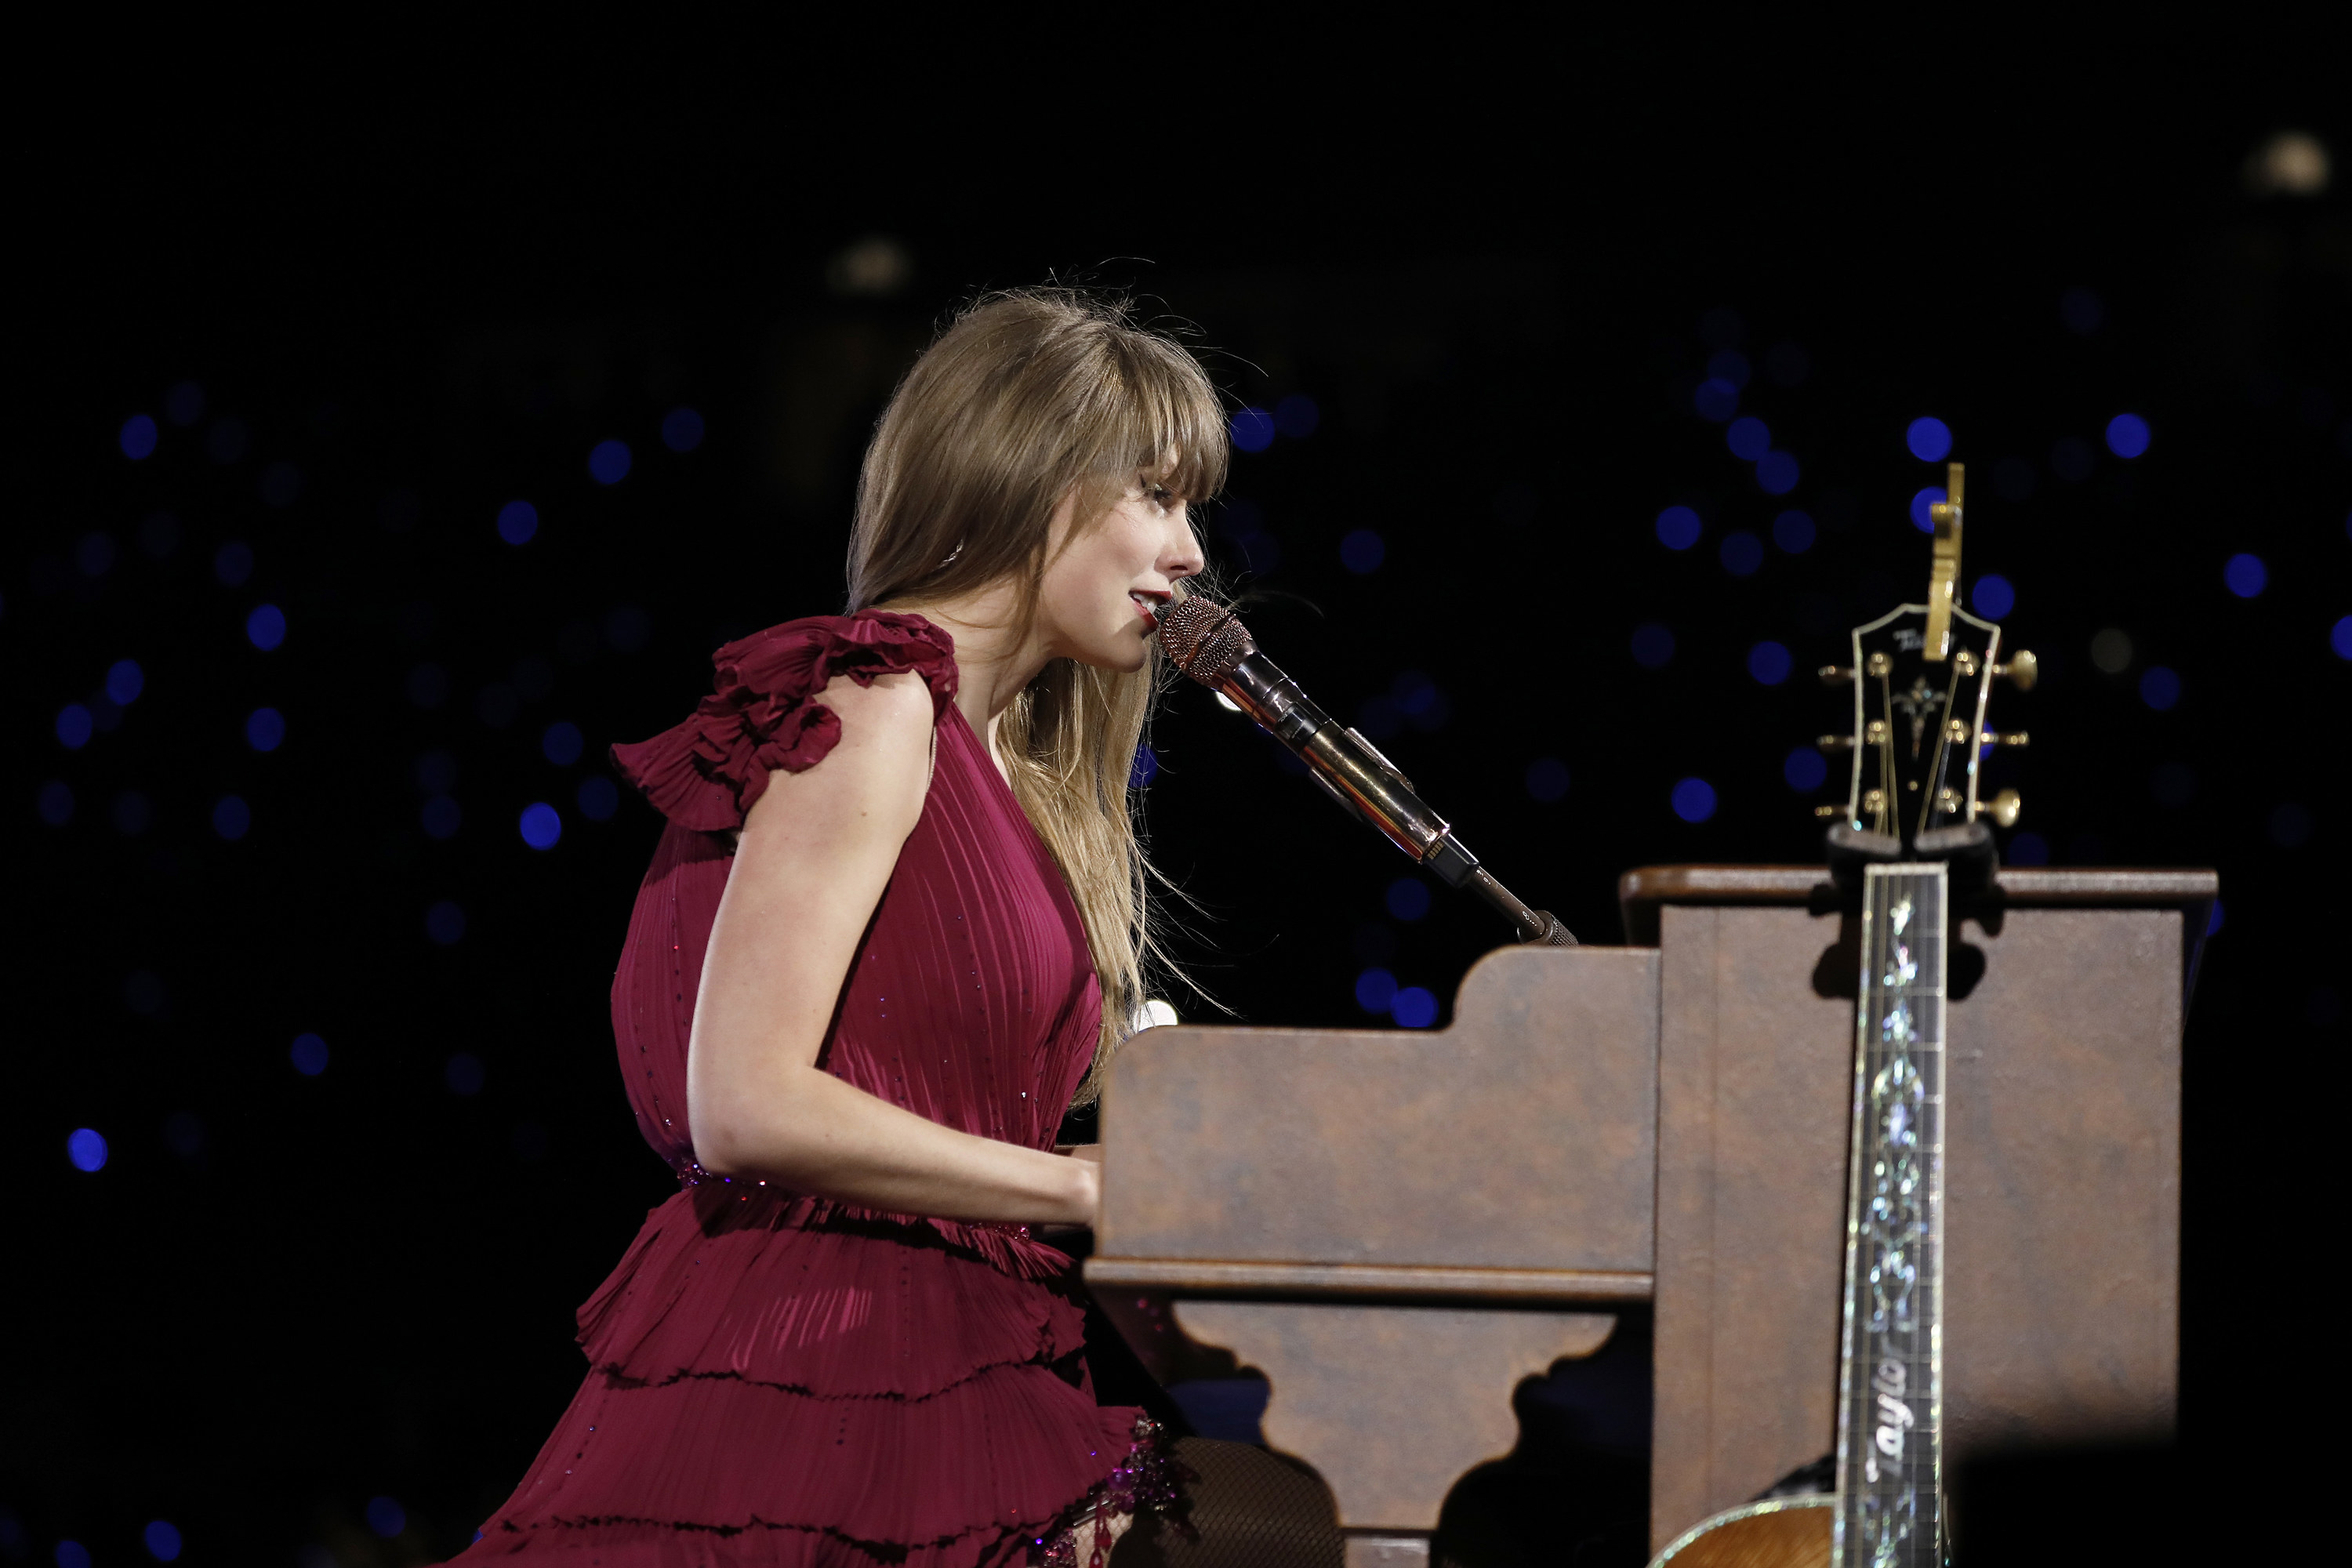 Taylor playing the piano on stage